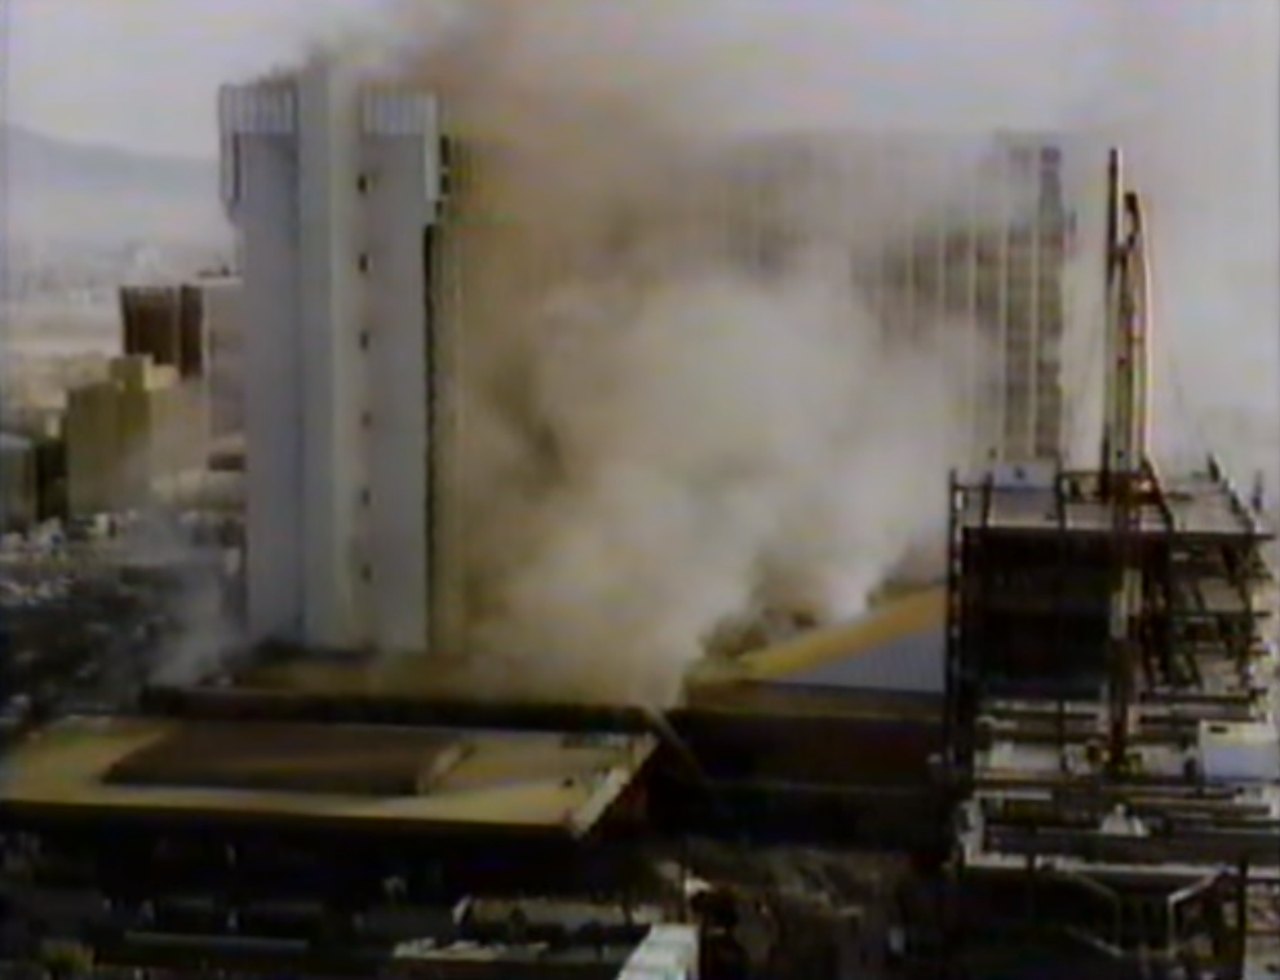 The MGM Grand Fire in Las Vegas occurred on Nov 21, 1980 leading